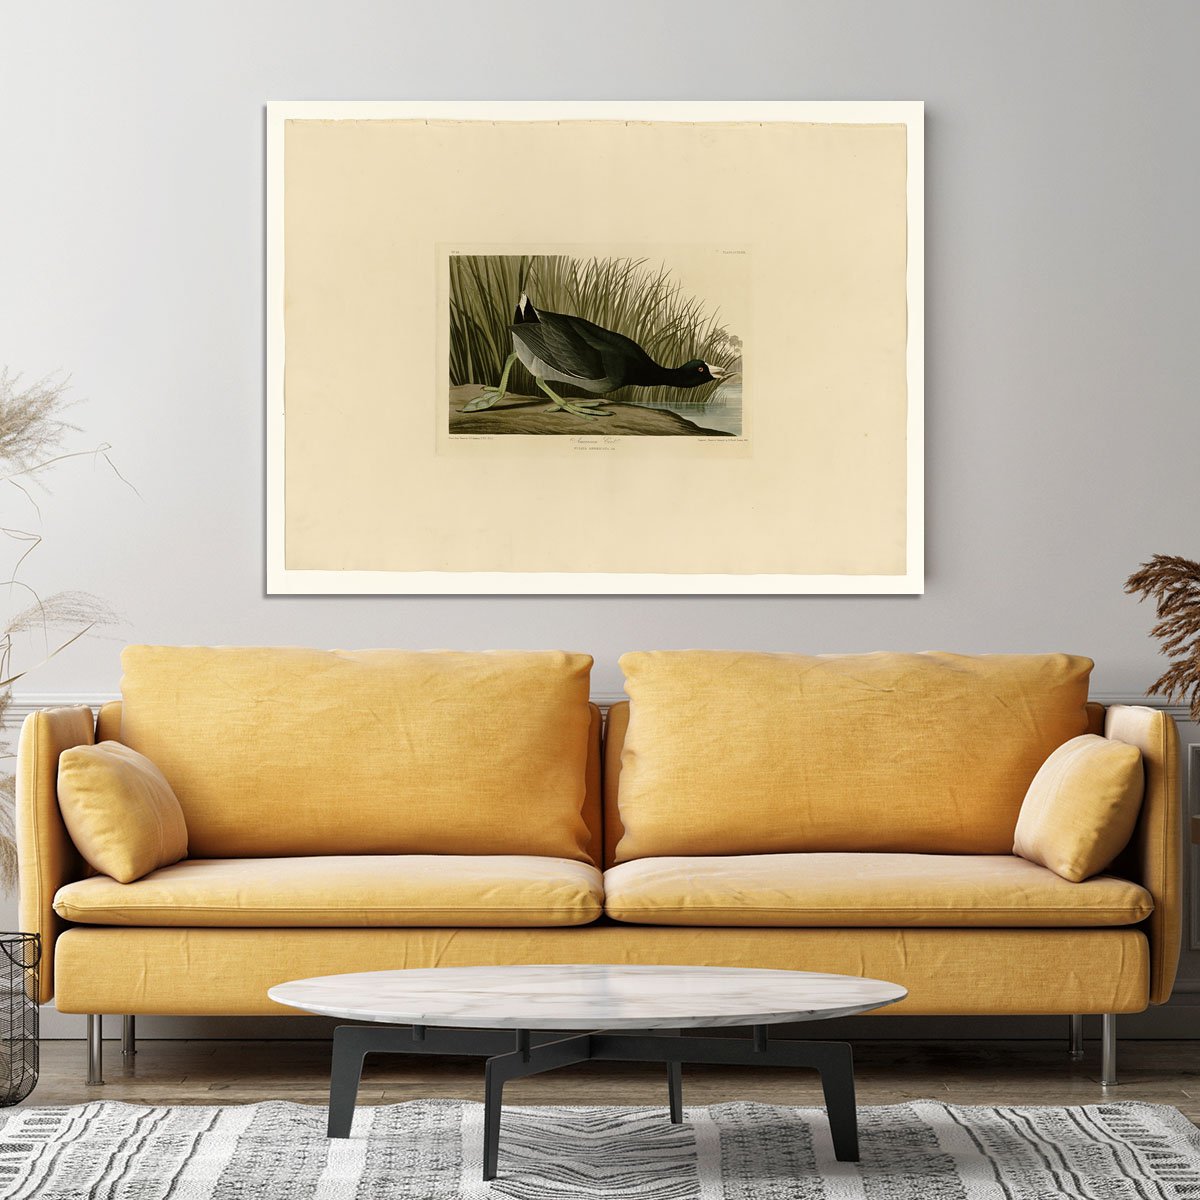 American Coot by Audubon Canvas Print or Poster